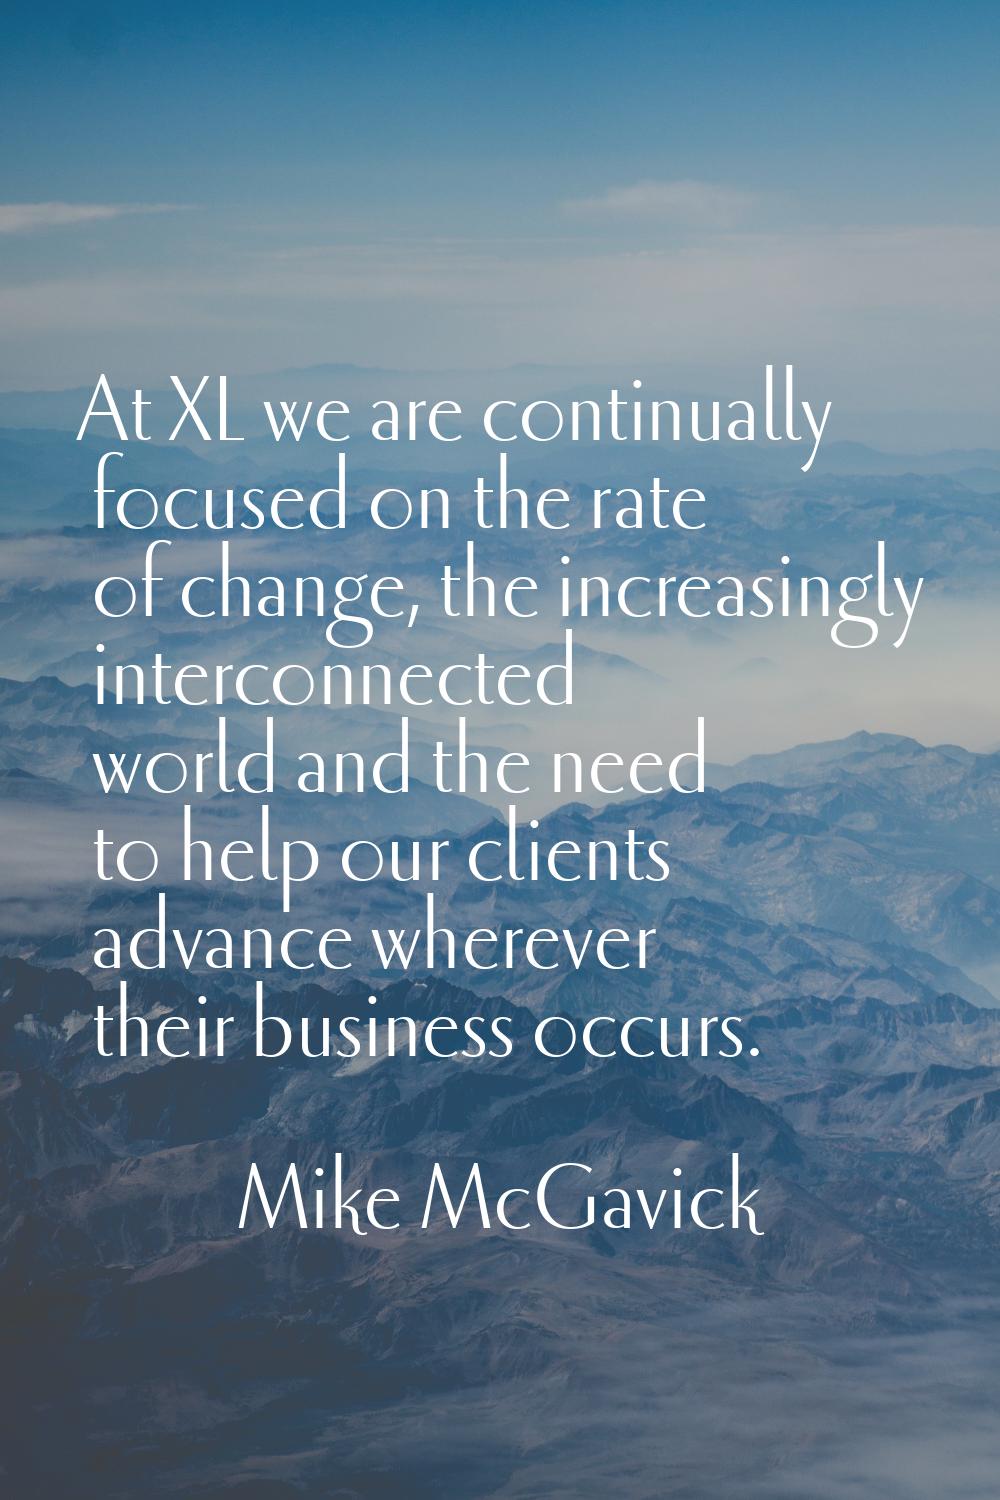 At XL we are continually focused on the rate of change, the increasingly interconnected world and t